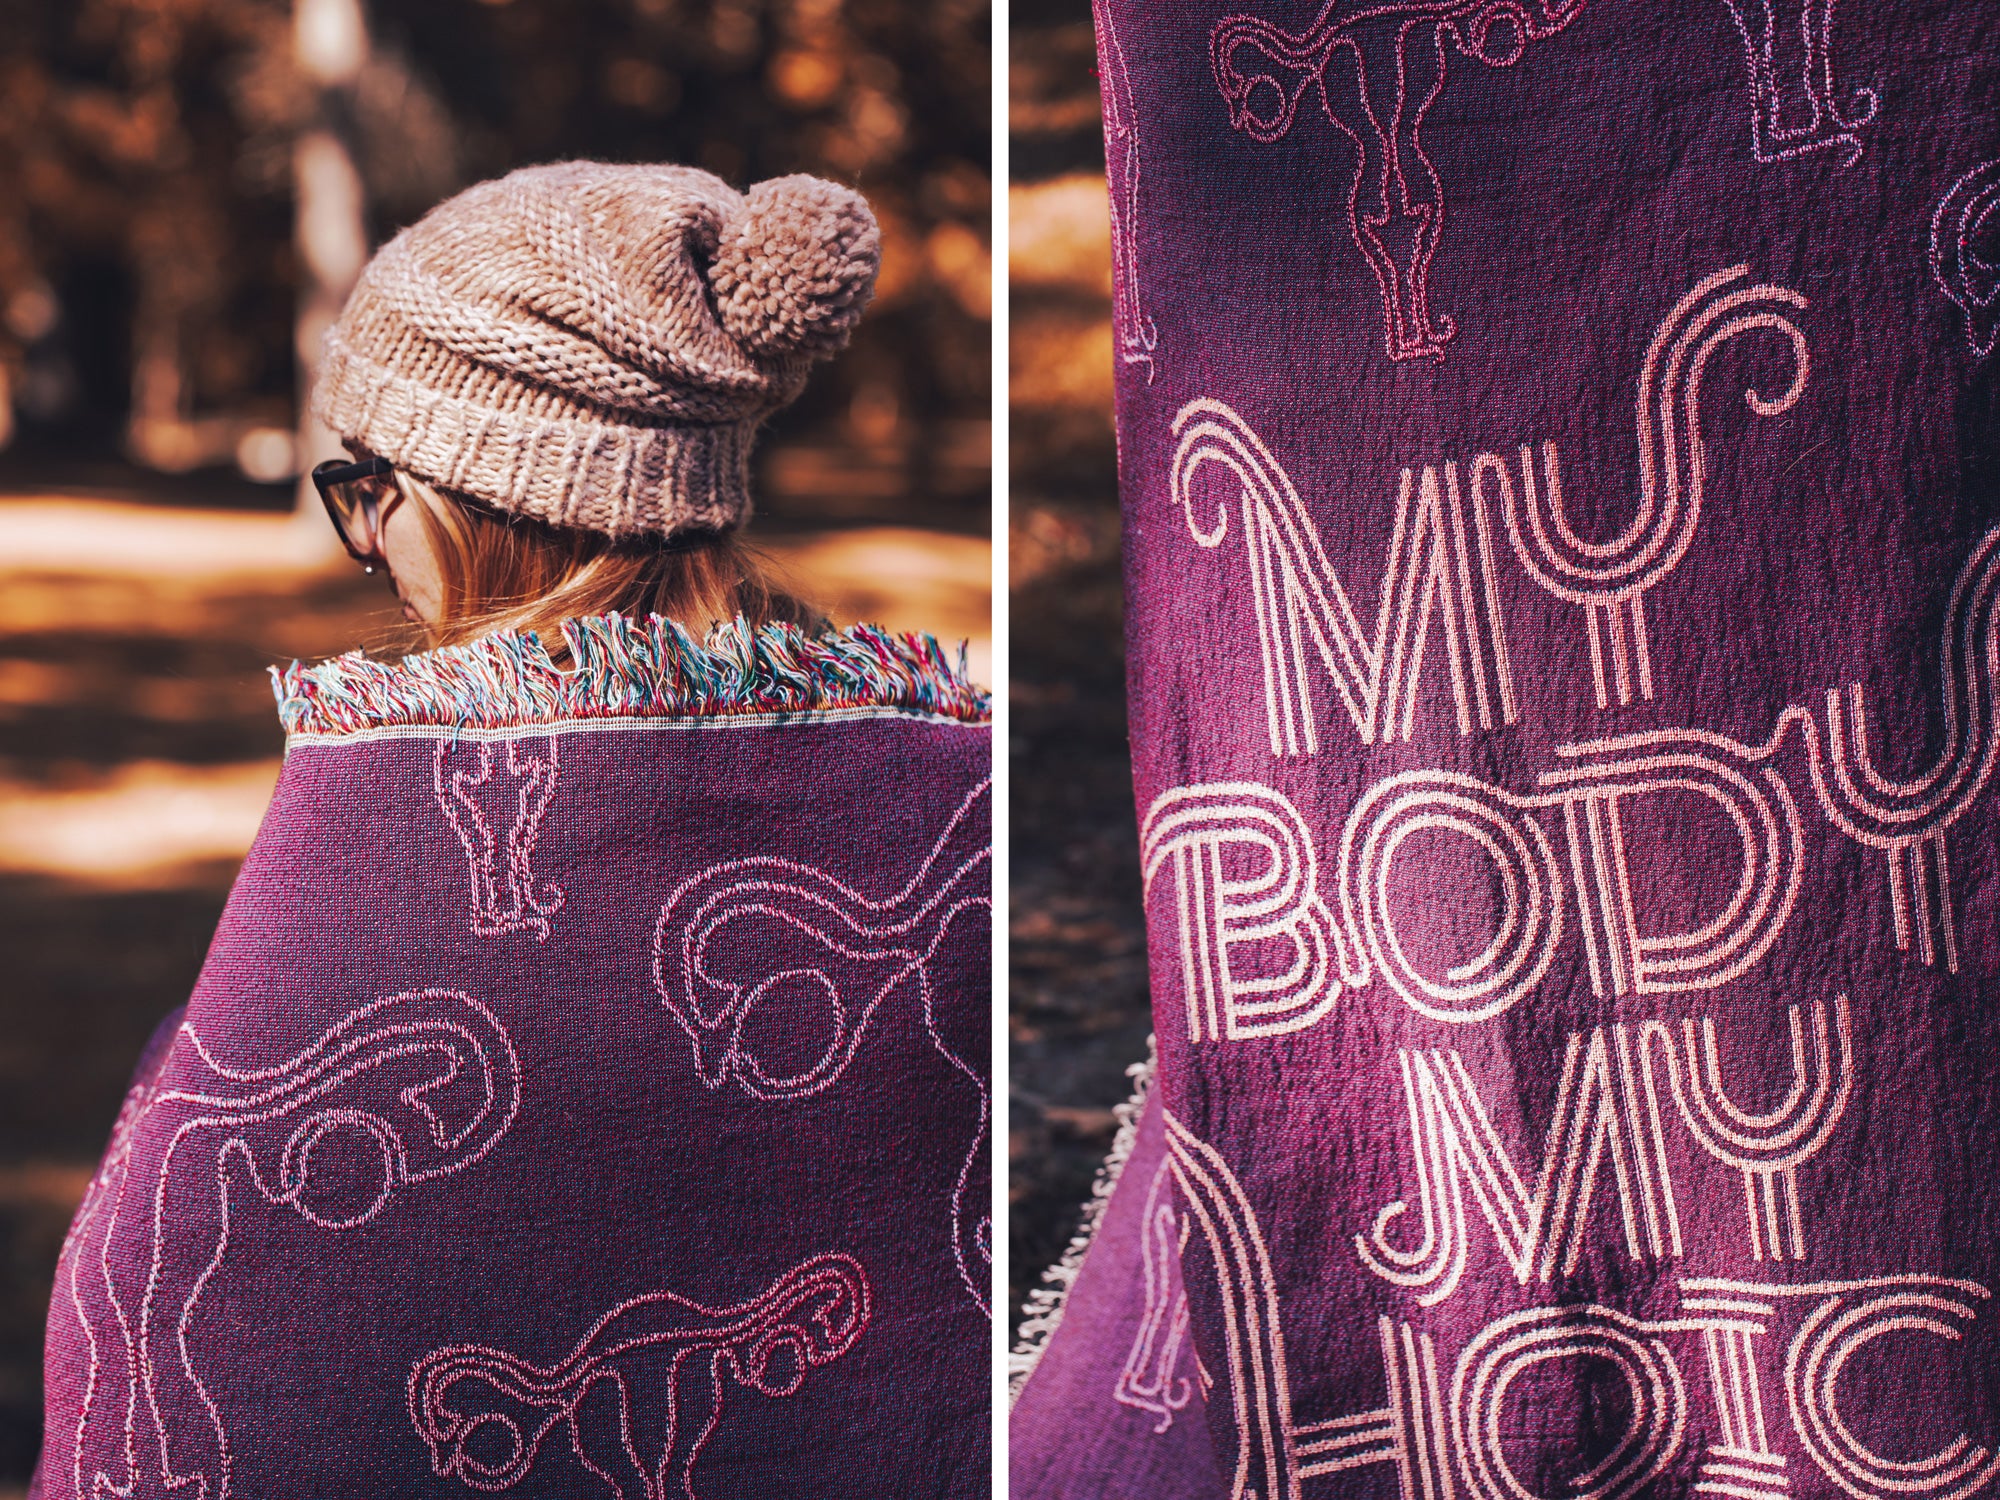 Close up of blanket fringe and My Body My Choice lettering on purple woven blanket